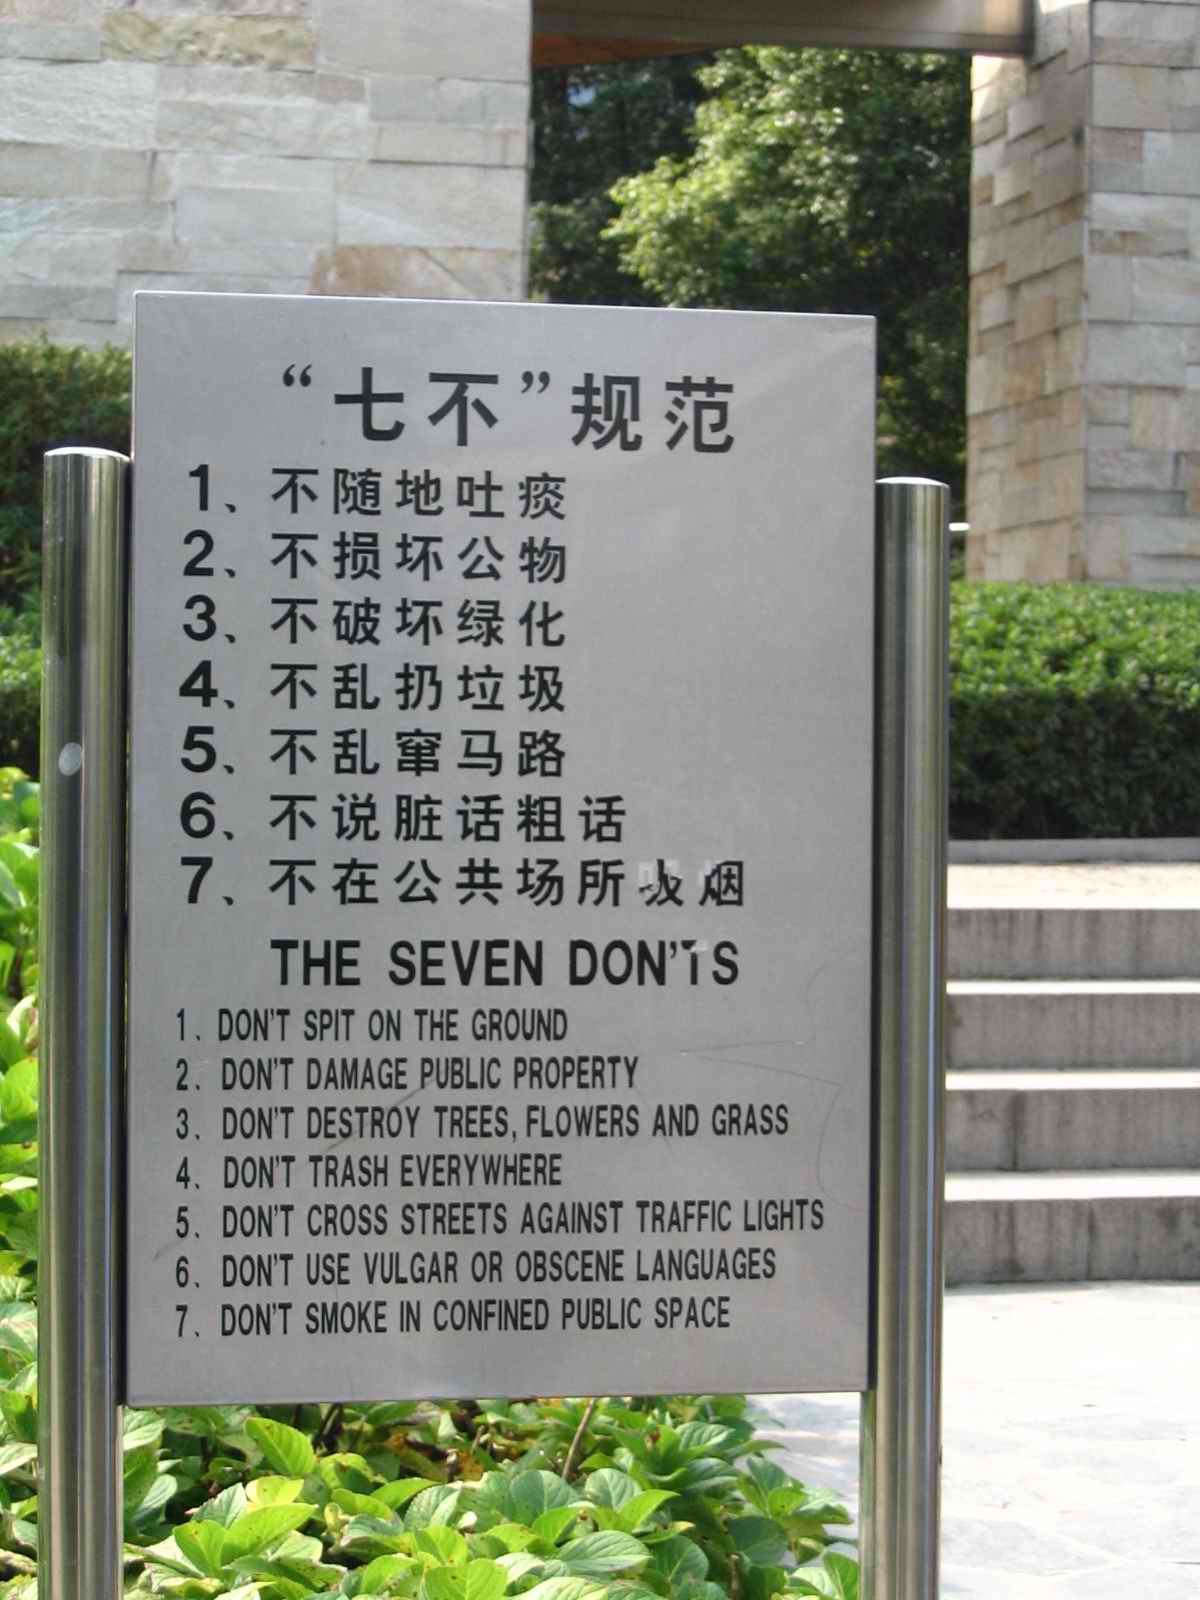 The Seven Donts